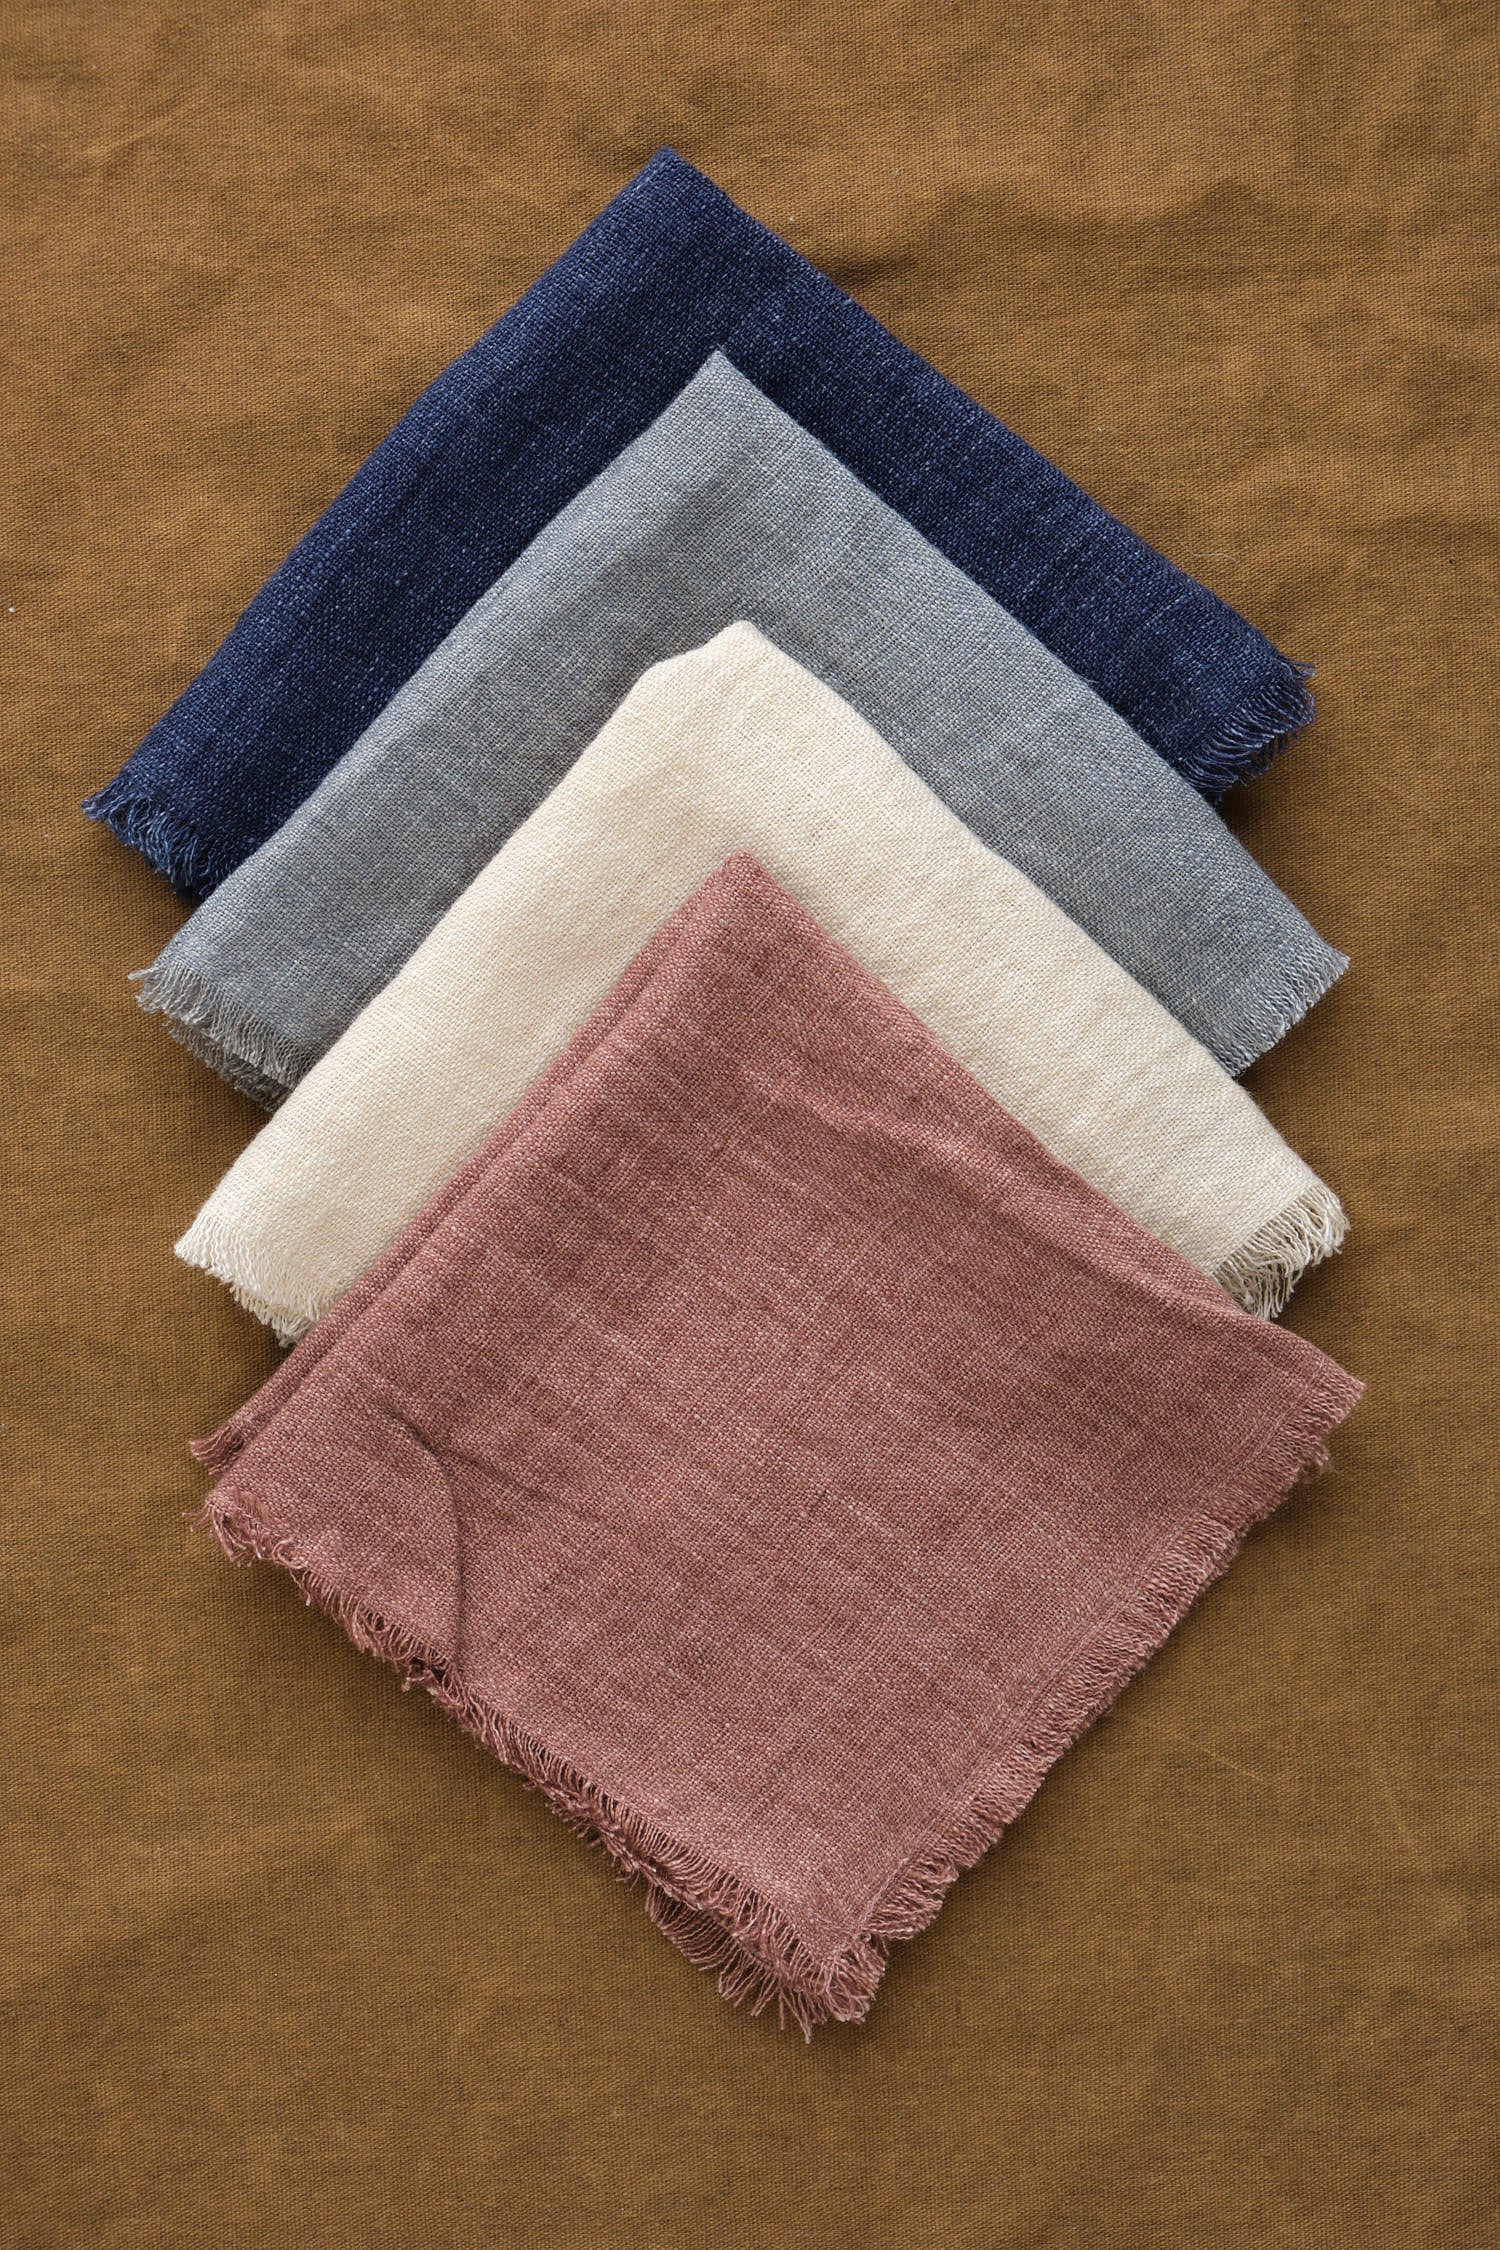 Stone Washed Linen Cocktail Napkins